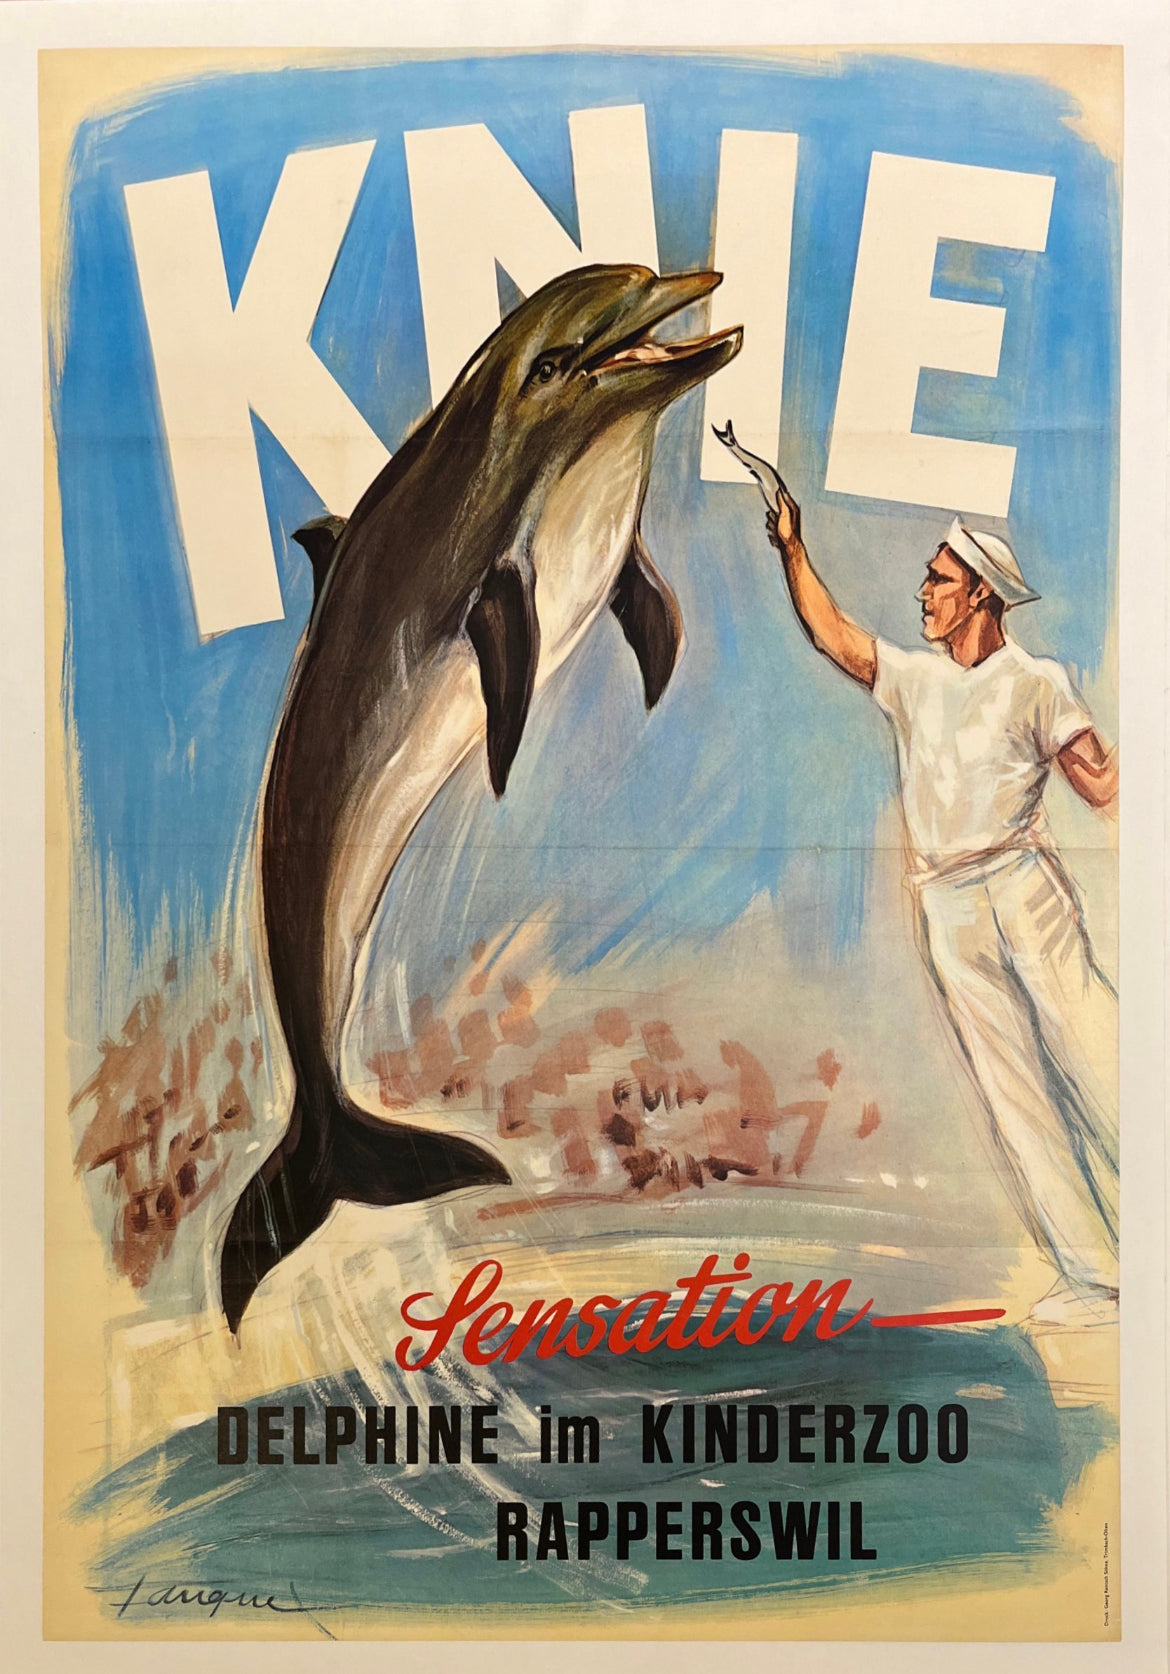 Knie Zoo Vintage Poster Linen Backed